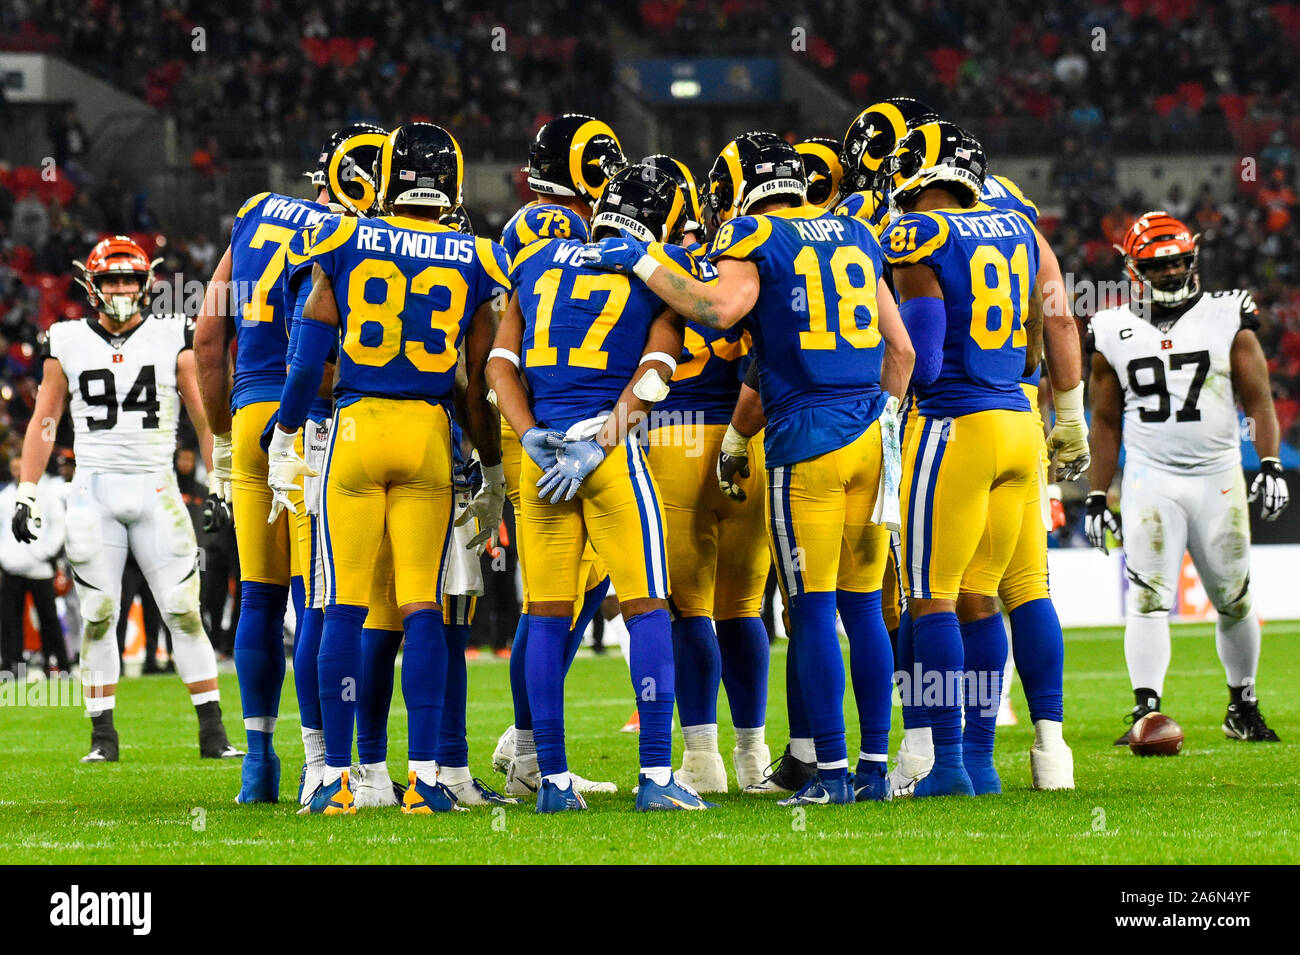 London, UK. 27 October 2019. Rams team in a huddle during the NFL match Cincinnati  Bengals v Los Angeles Rams at Wembley Stadium, game 3 of this year's NFL  London Games. Final